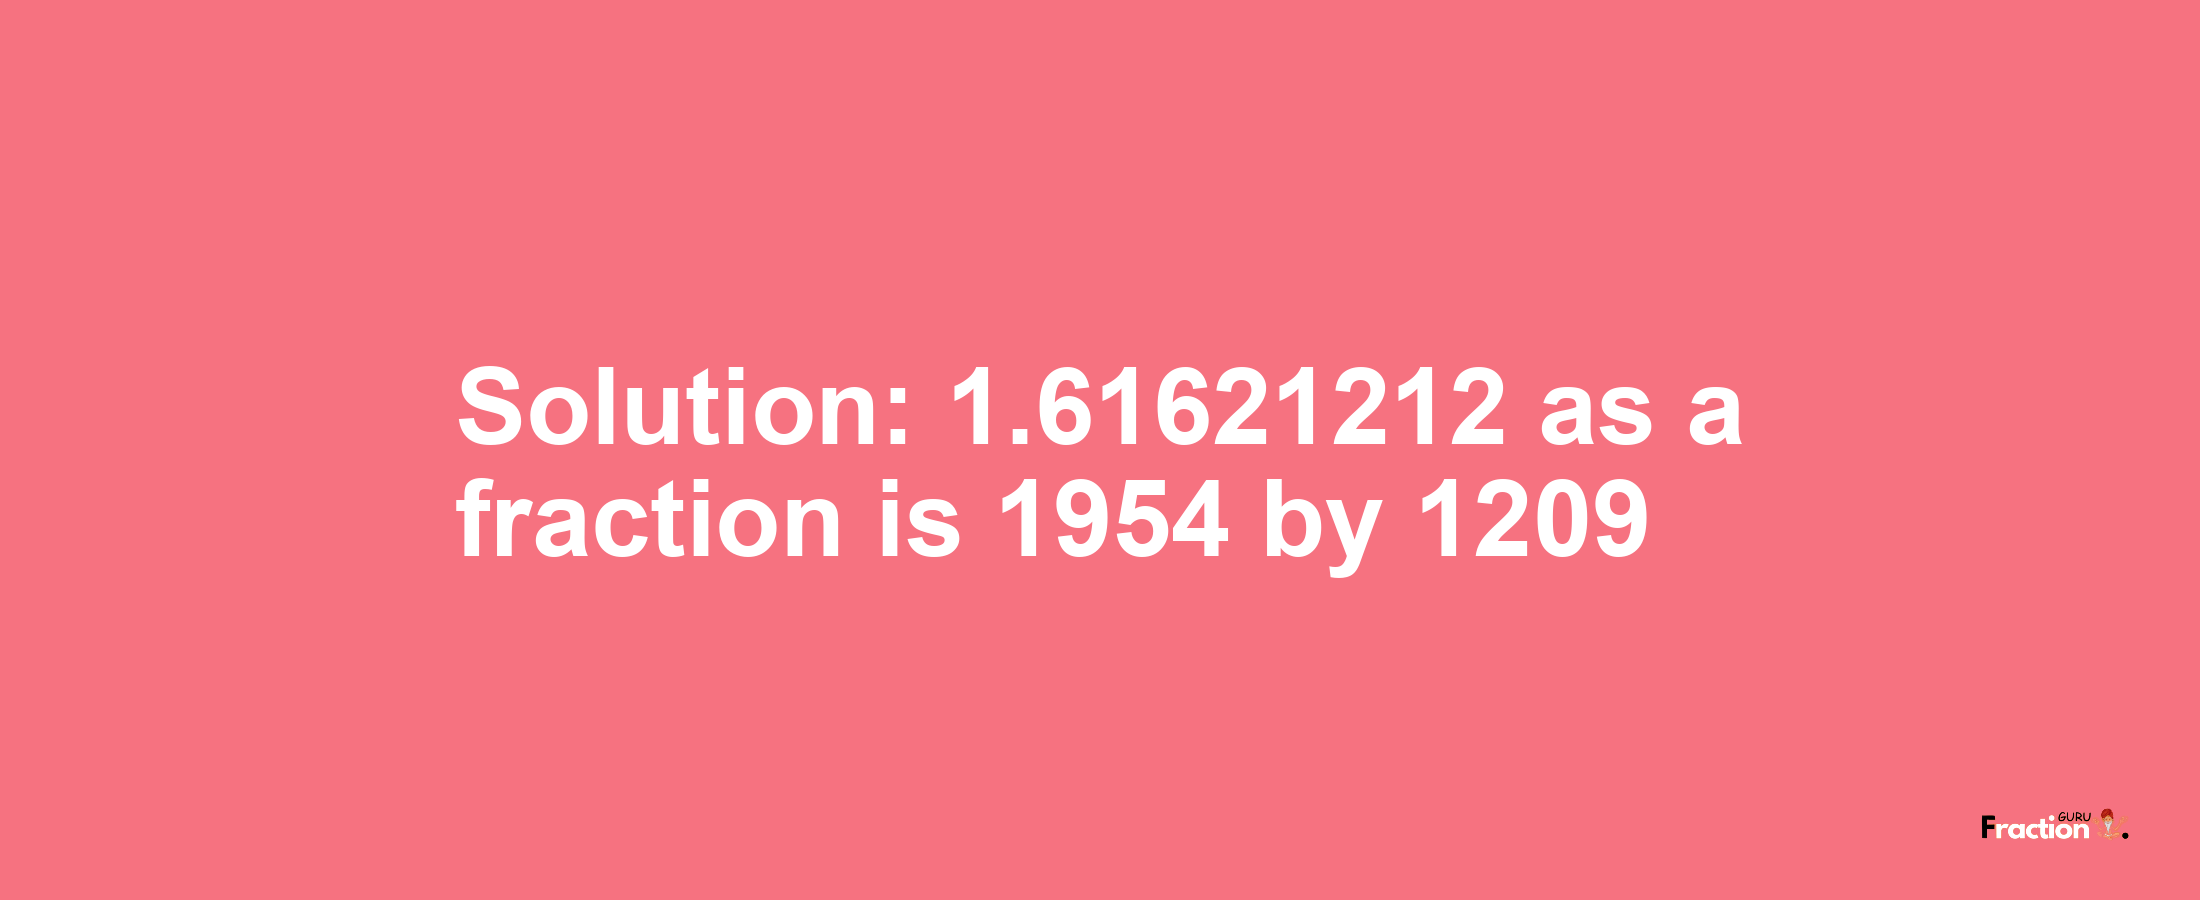 Solution:1.61621212 as a fraction is 1954/1209